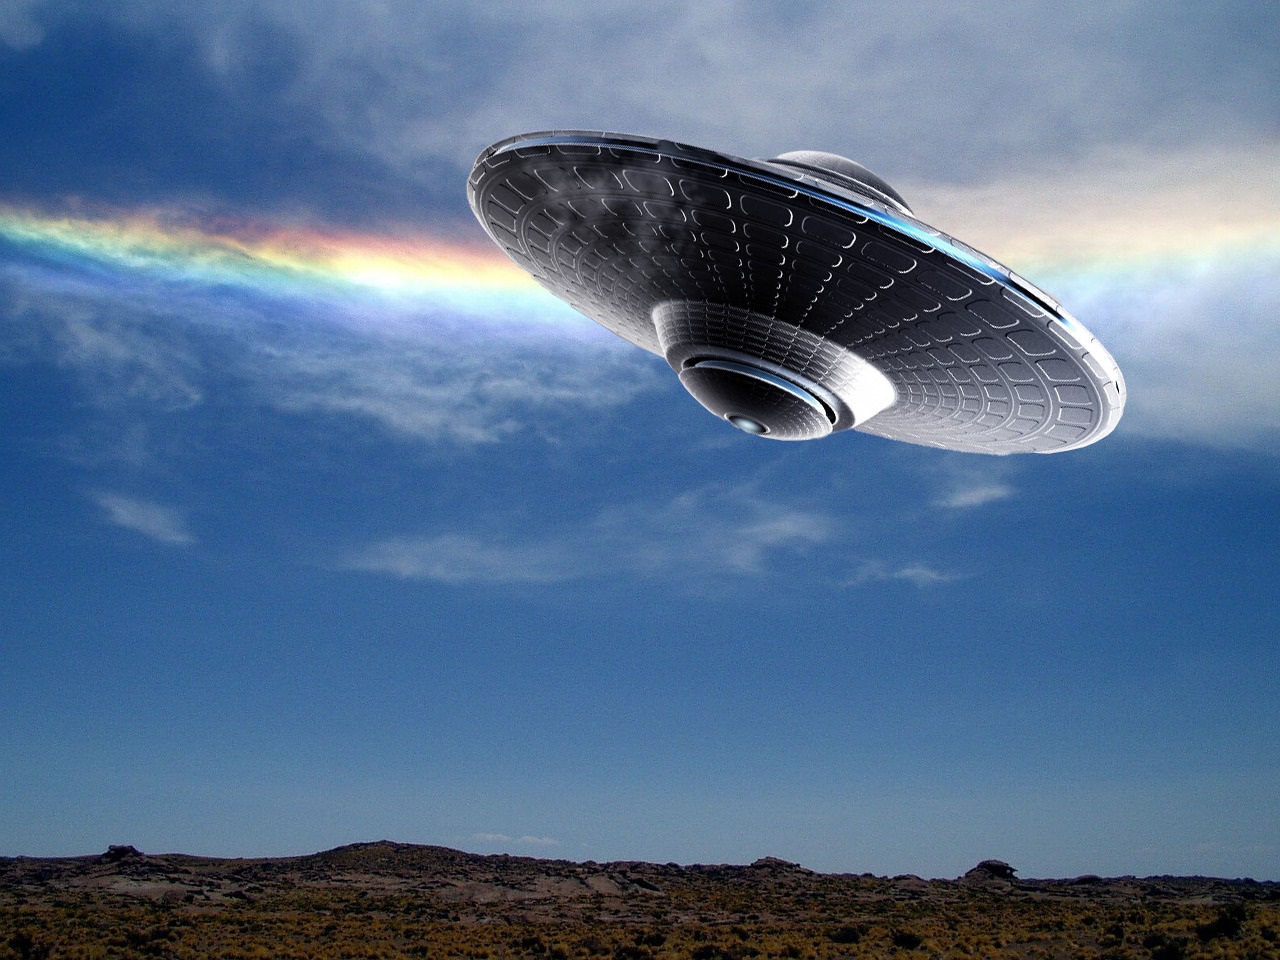 An image showing a UFO in the daytime sky